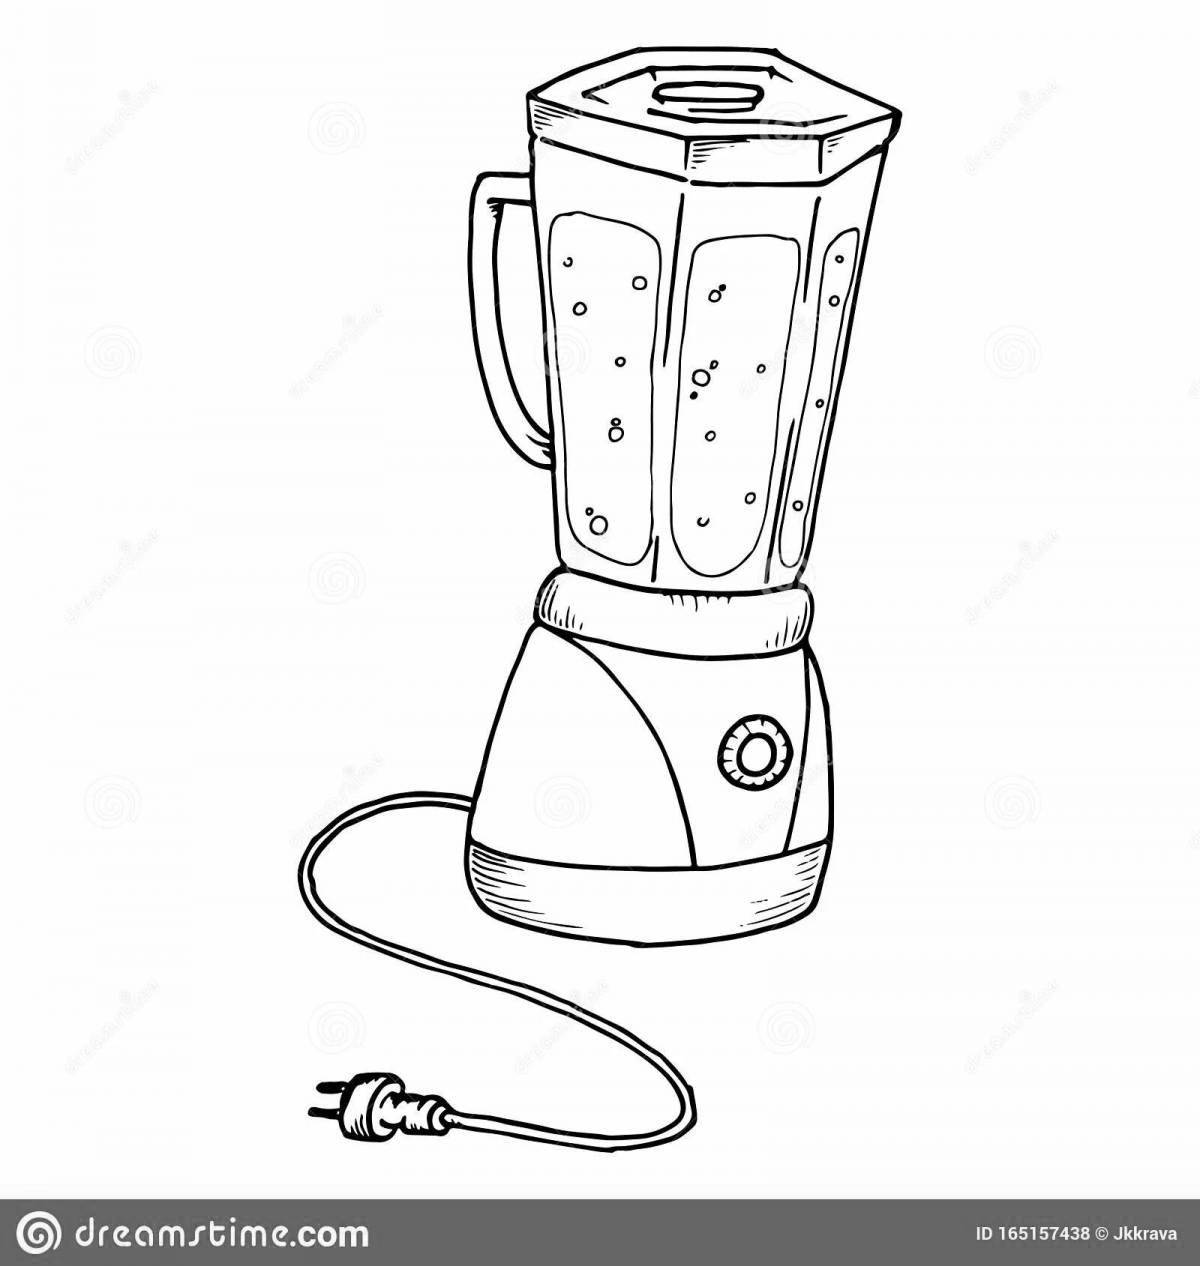 Colorful blender coloring page